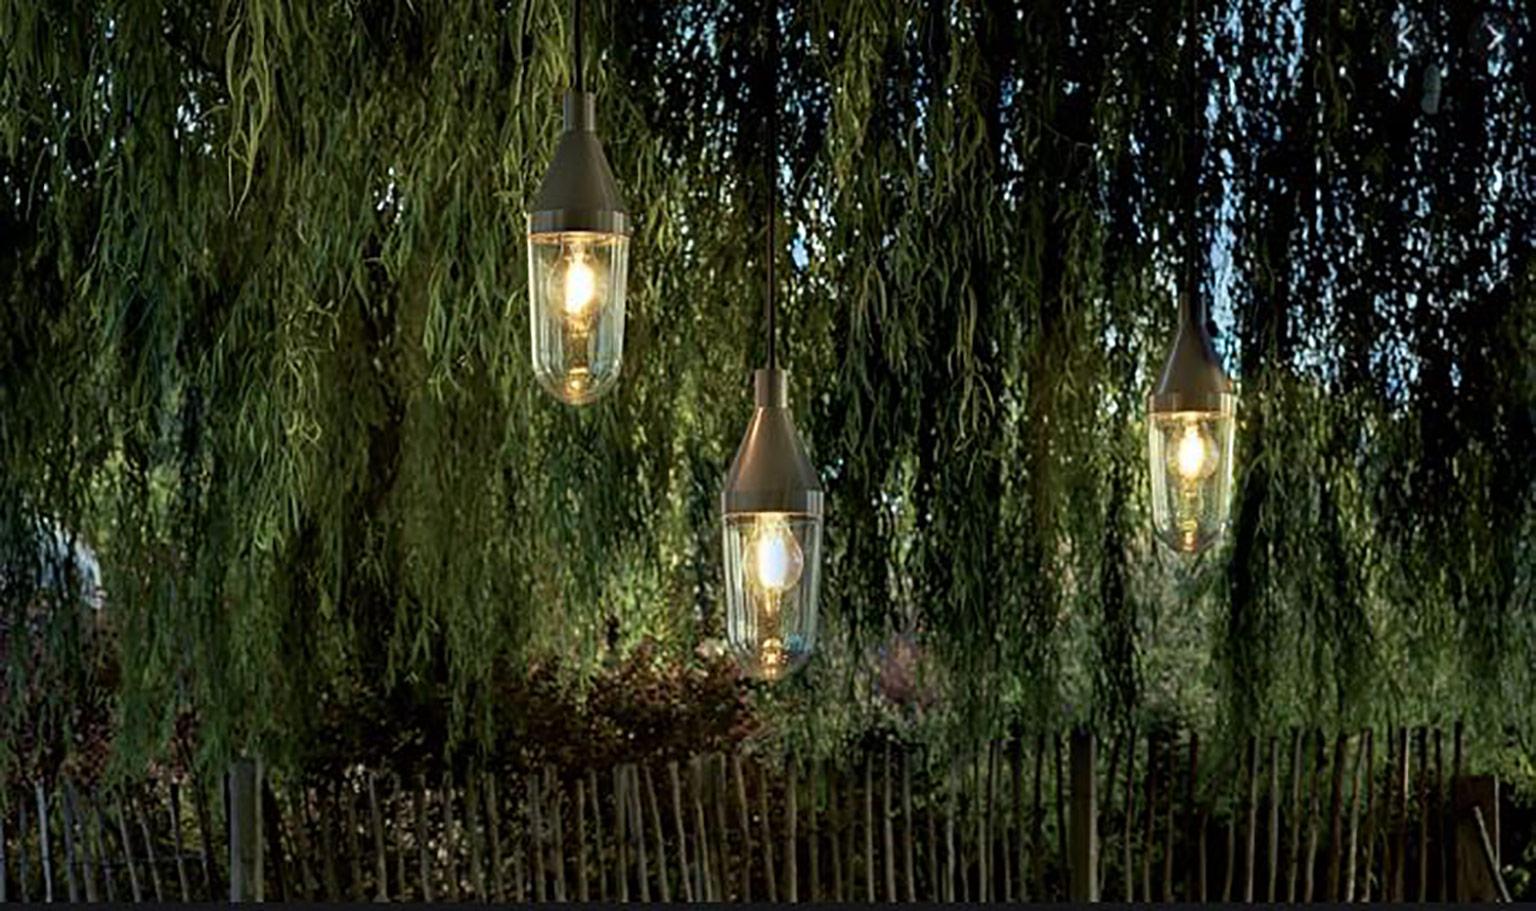 Niwa outdoor lamp by Christophe Pillet for Oluce. The light bulb is protected in a transparent blown-glass diffuser connected to a lacquered aluminum cone. 1 x max 15 W - E26 (LED) as lamp type. 

Dimensions:
10cm W x 30cm L (1000cm cable length).